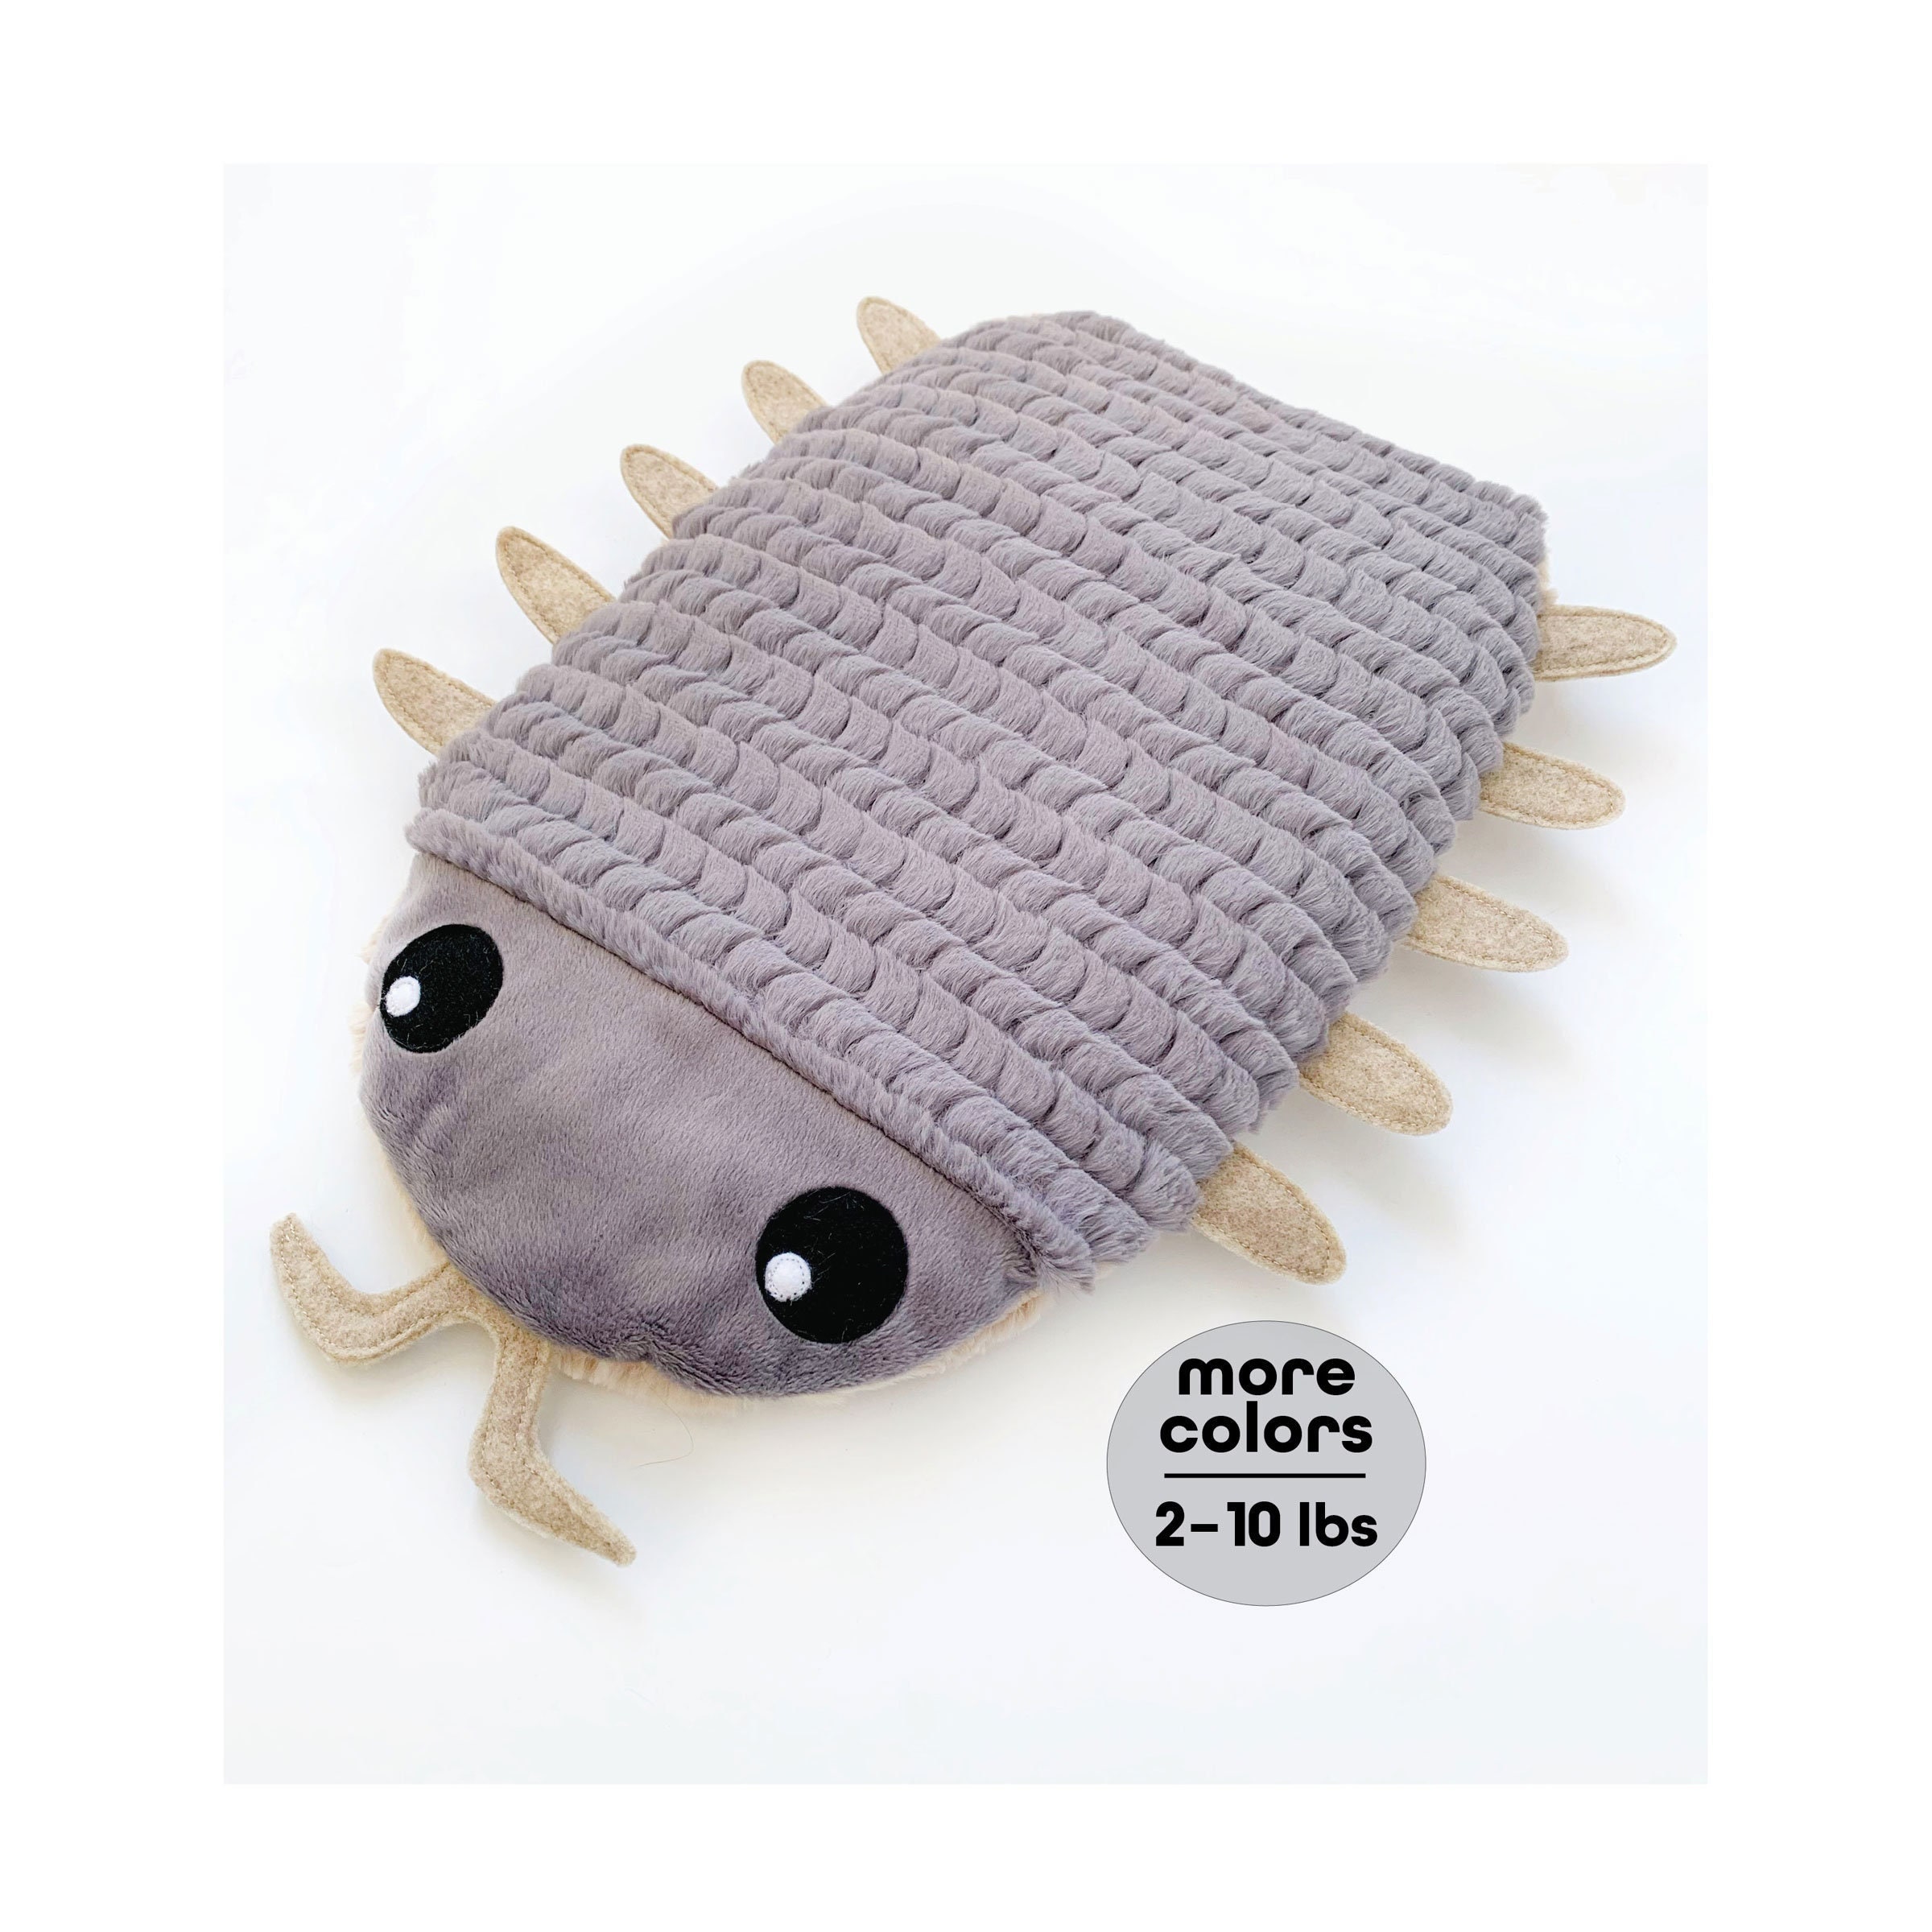 Made-to-Order Cute Roly Poly Heatable Weighted Plush Isopod | Cuddly Soft Doodle Bug | Microwave Heating Pad | Handmade |Unique Science Gift